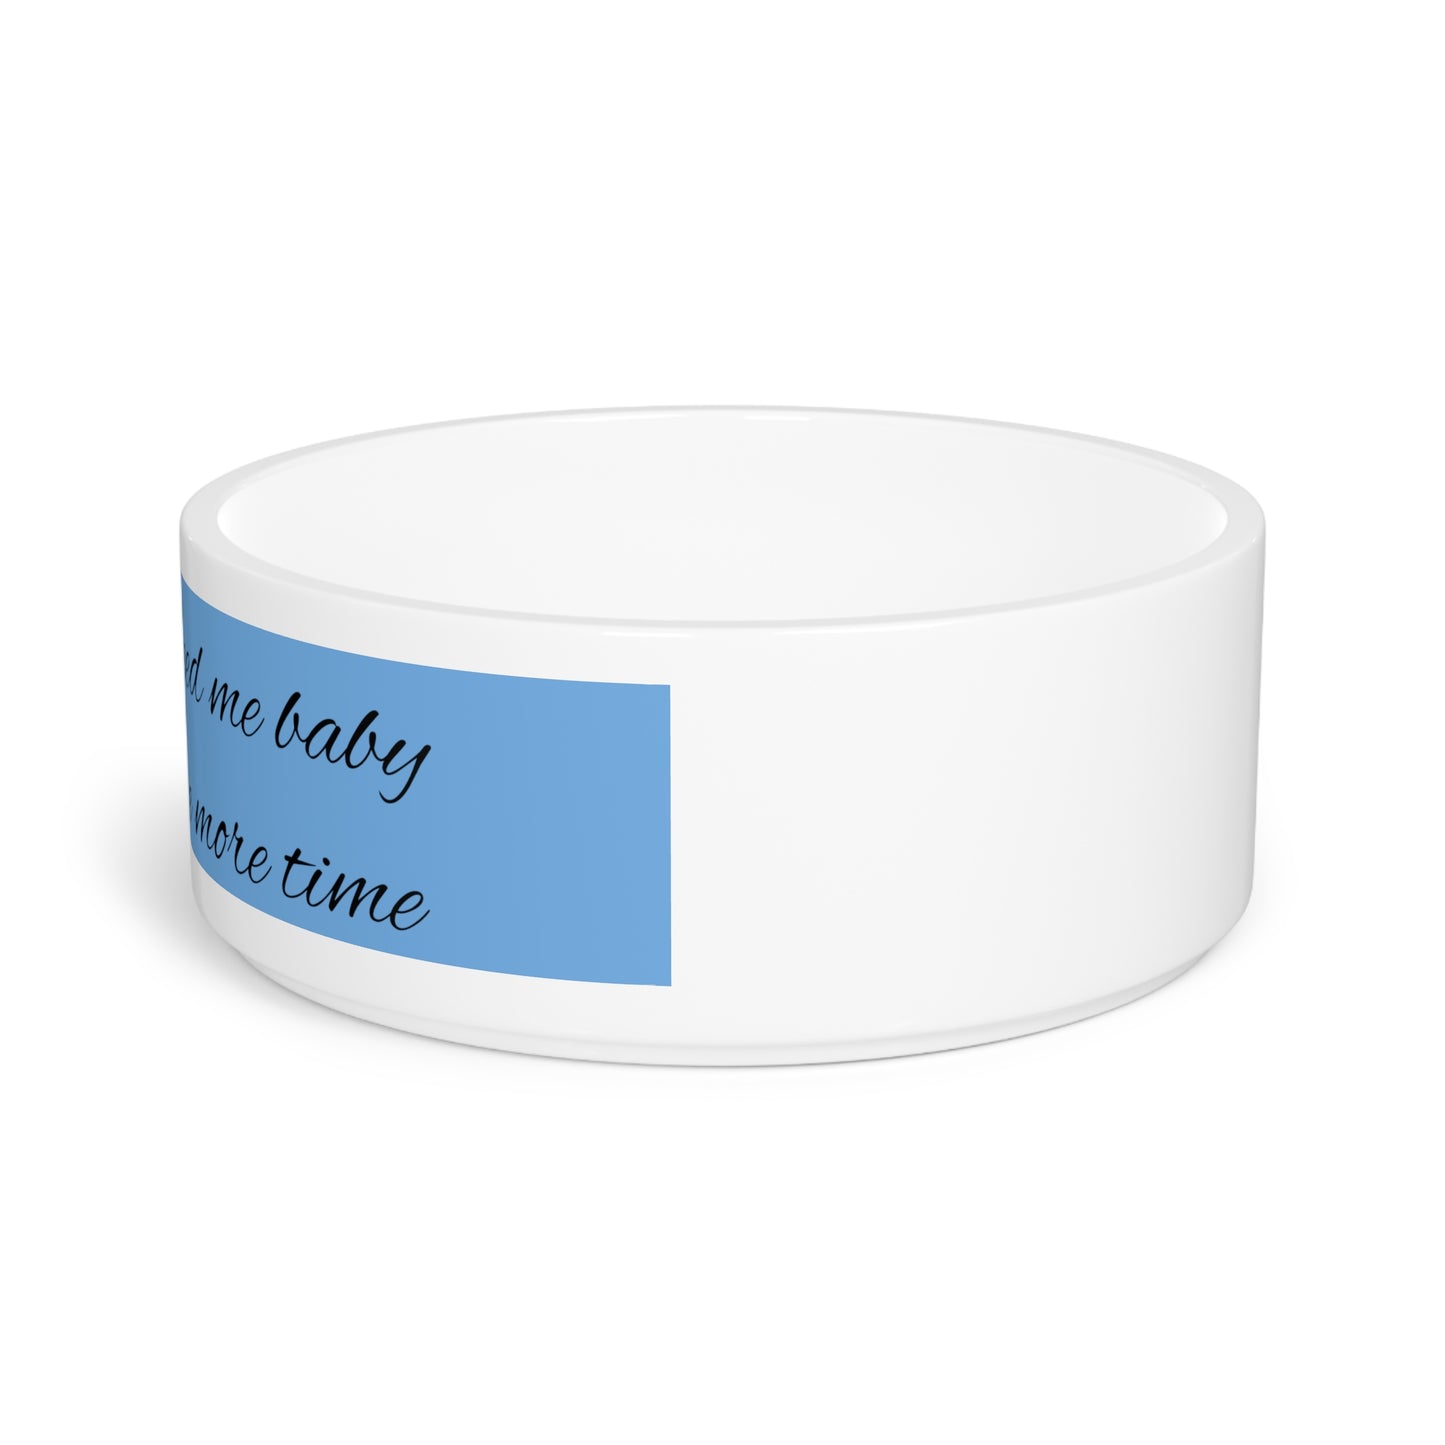 Pet Bowl Feed Me Baby One More Time light blue